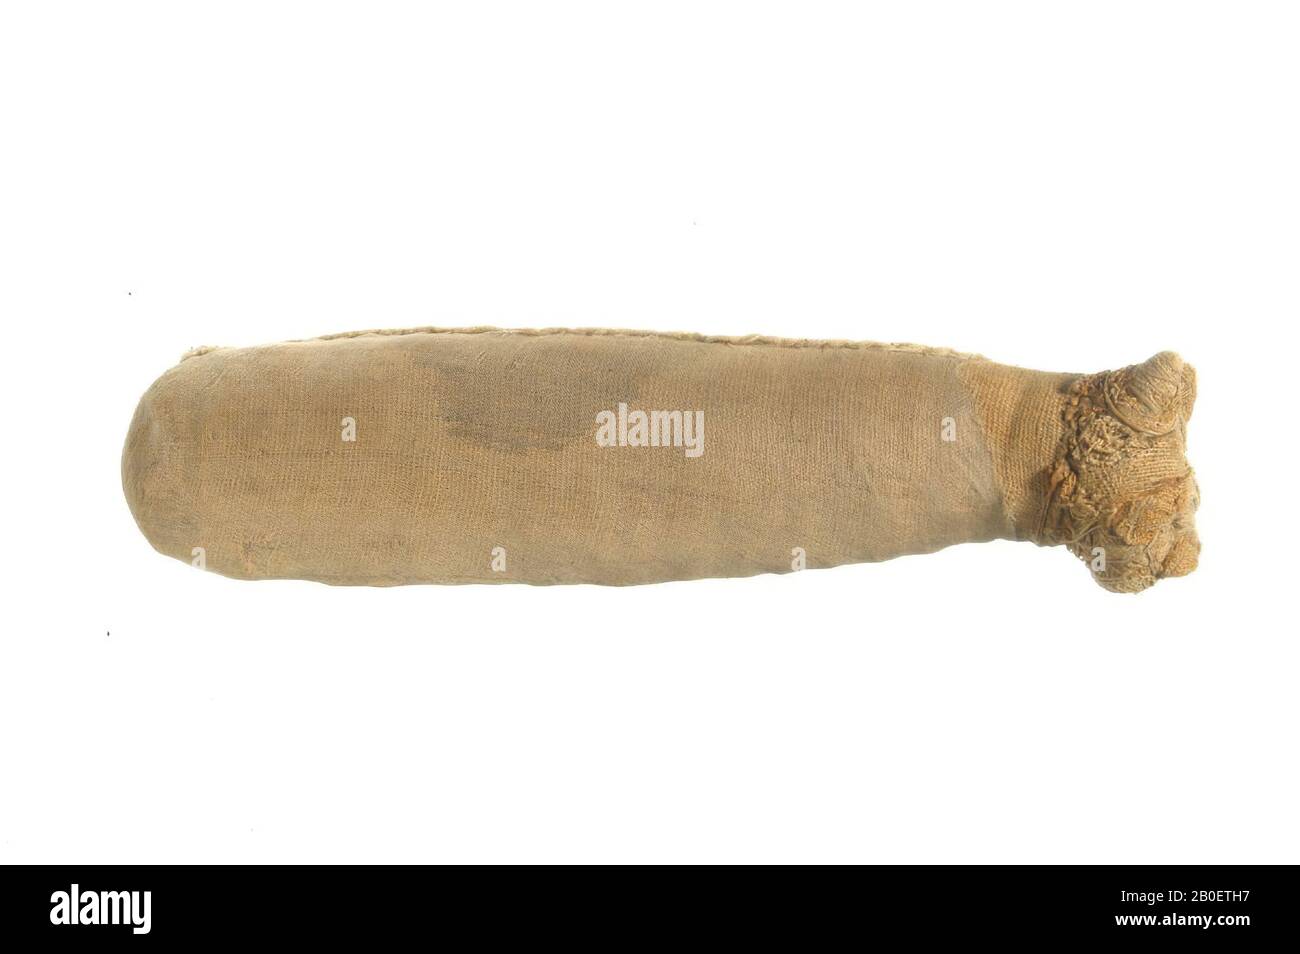 cat, Cat mummy with cylindrical body and naturalistic head. The animal's body has been wrapped in a single sheet or medium-fine linen (warp-faced tabby, about 13 x 32 threads Stock Photo